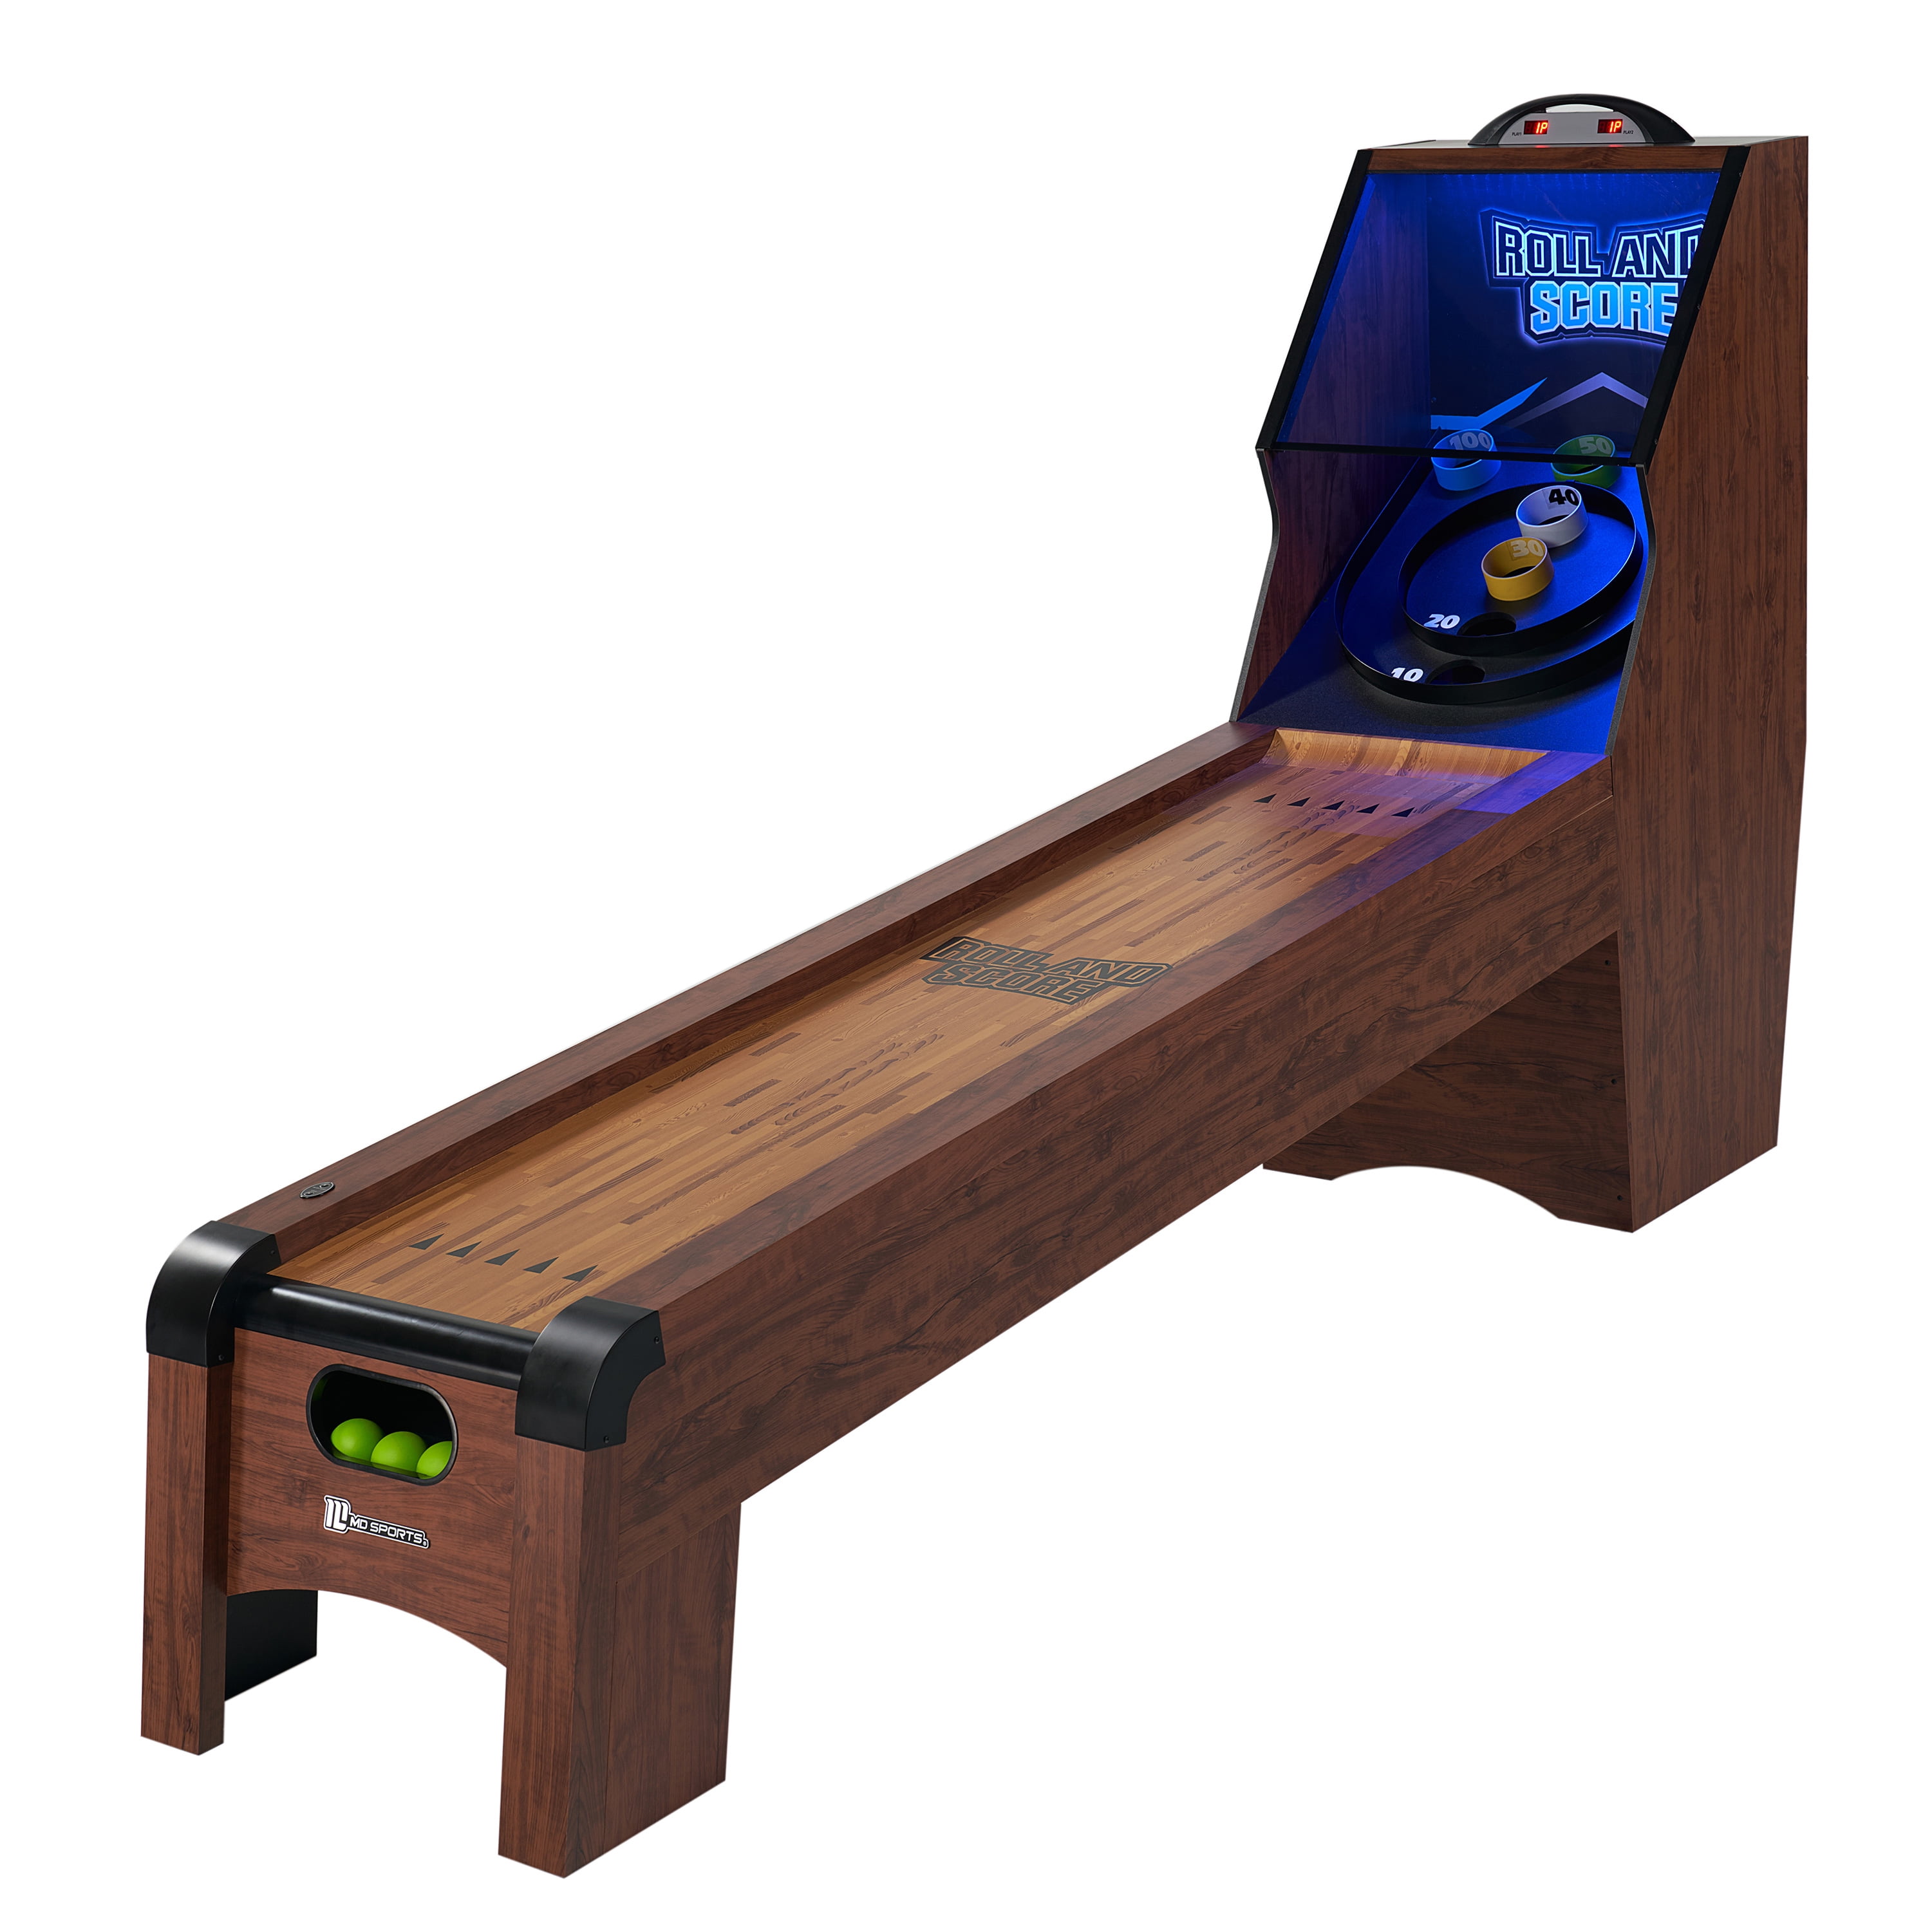 Give it a roll! Desktop Skee-Ball RP Minis 